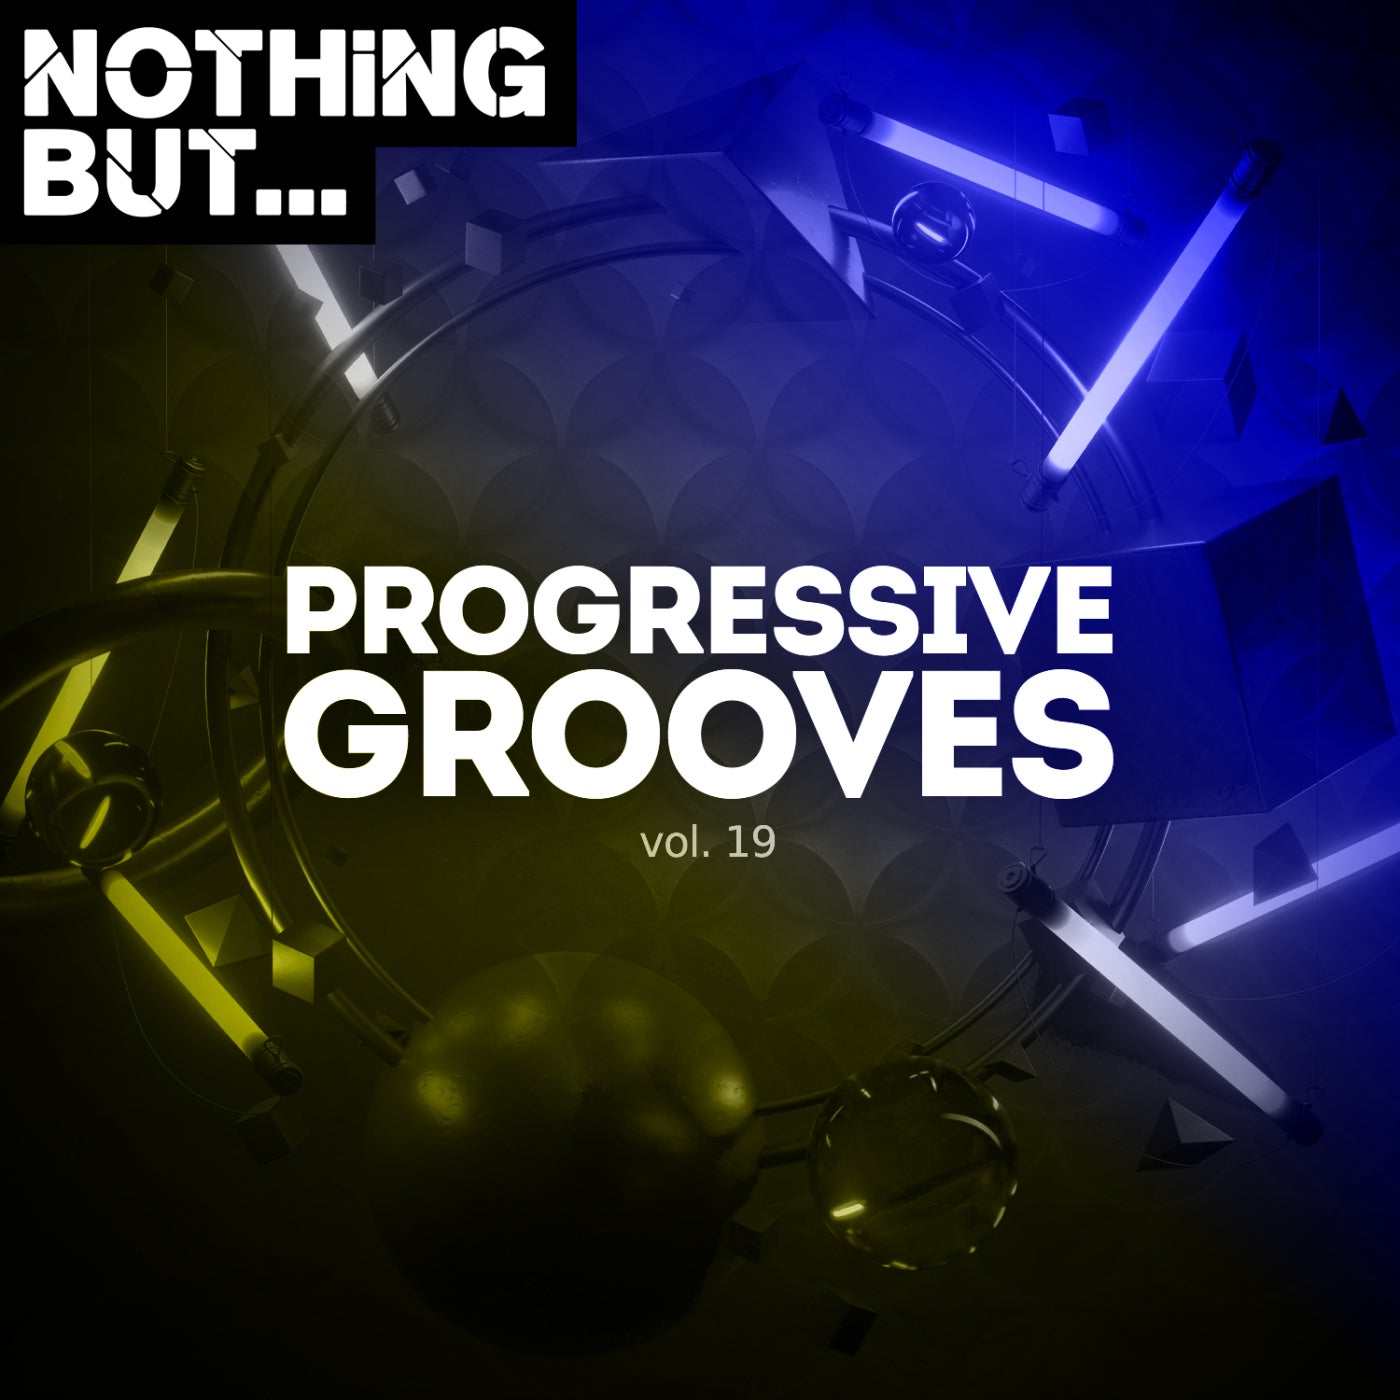 Nothing But... Progressive Grooves, Vol. 19